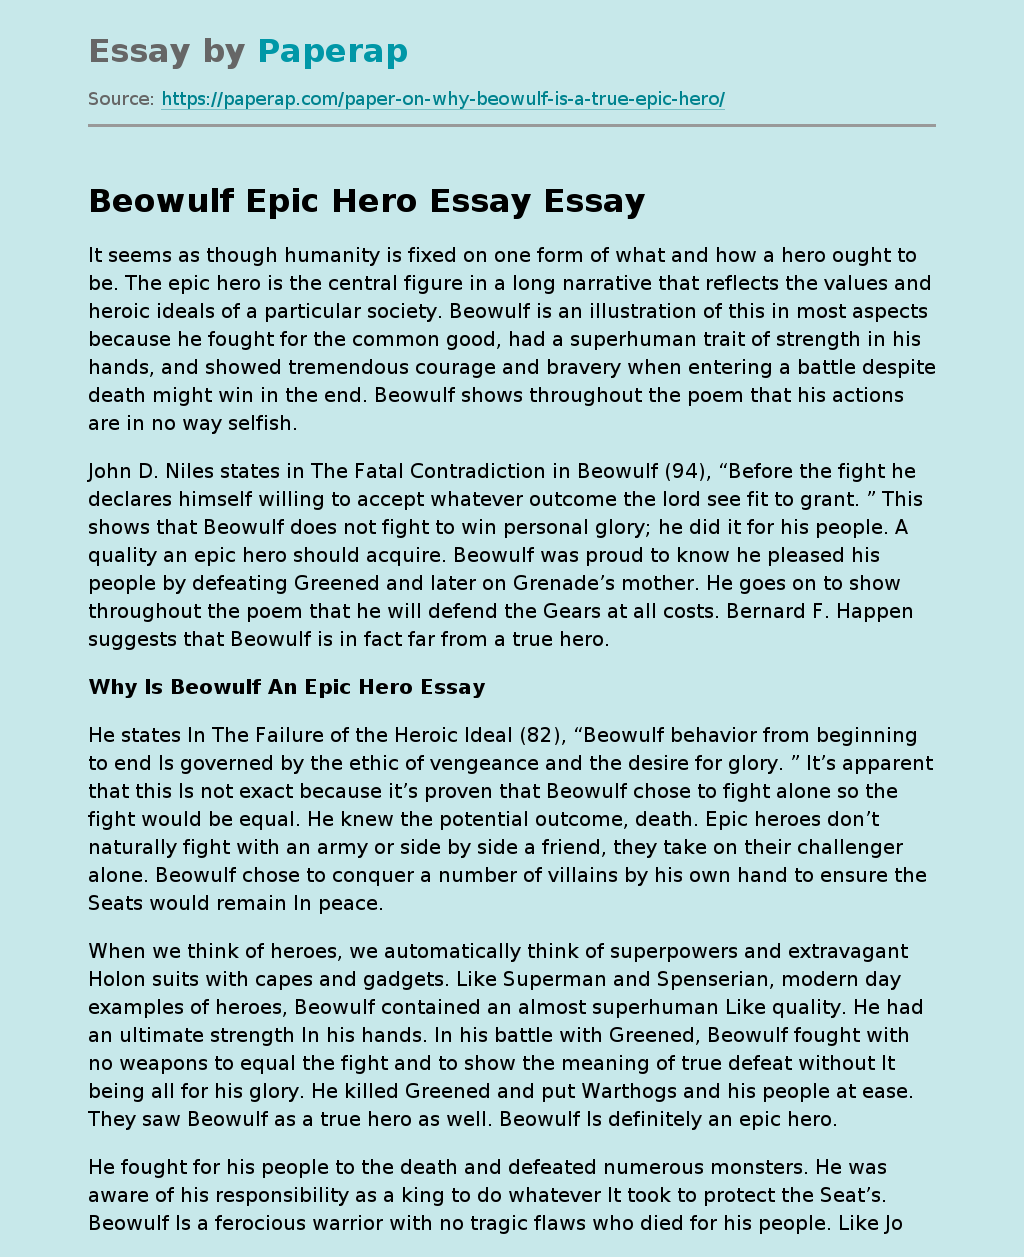 titles for an essay about beowulf